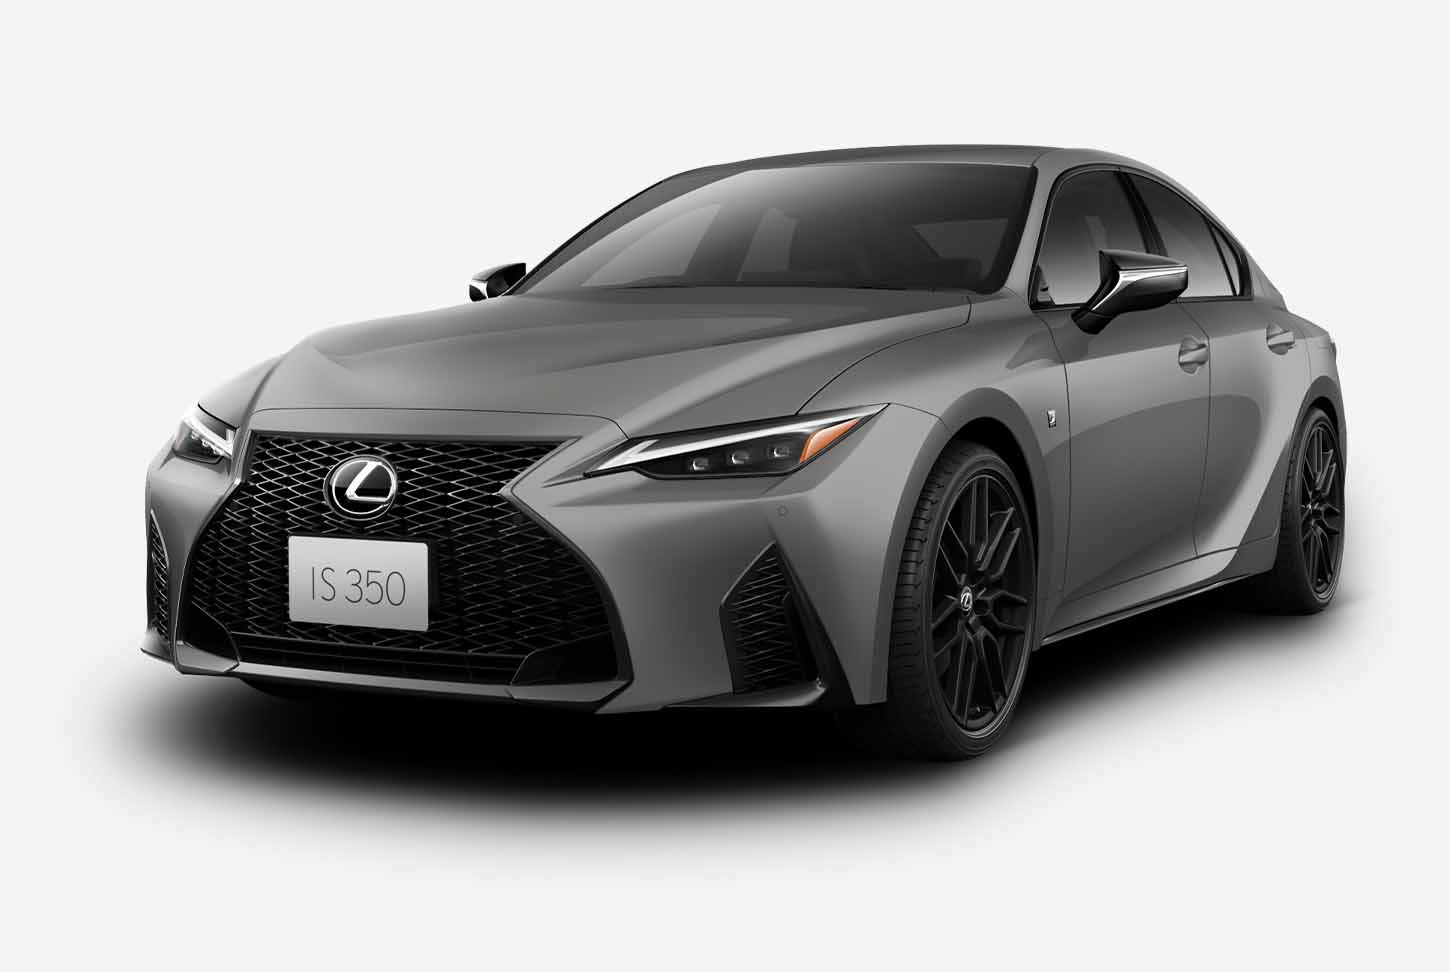 Specifications of the 2022 Lexus IS 350 F Sport - Lexus of Concord